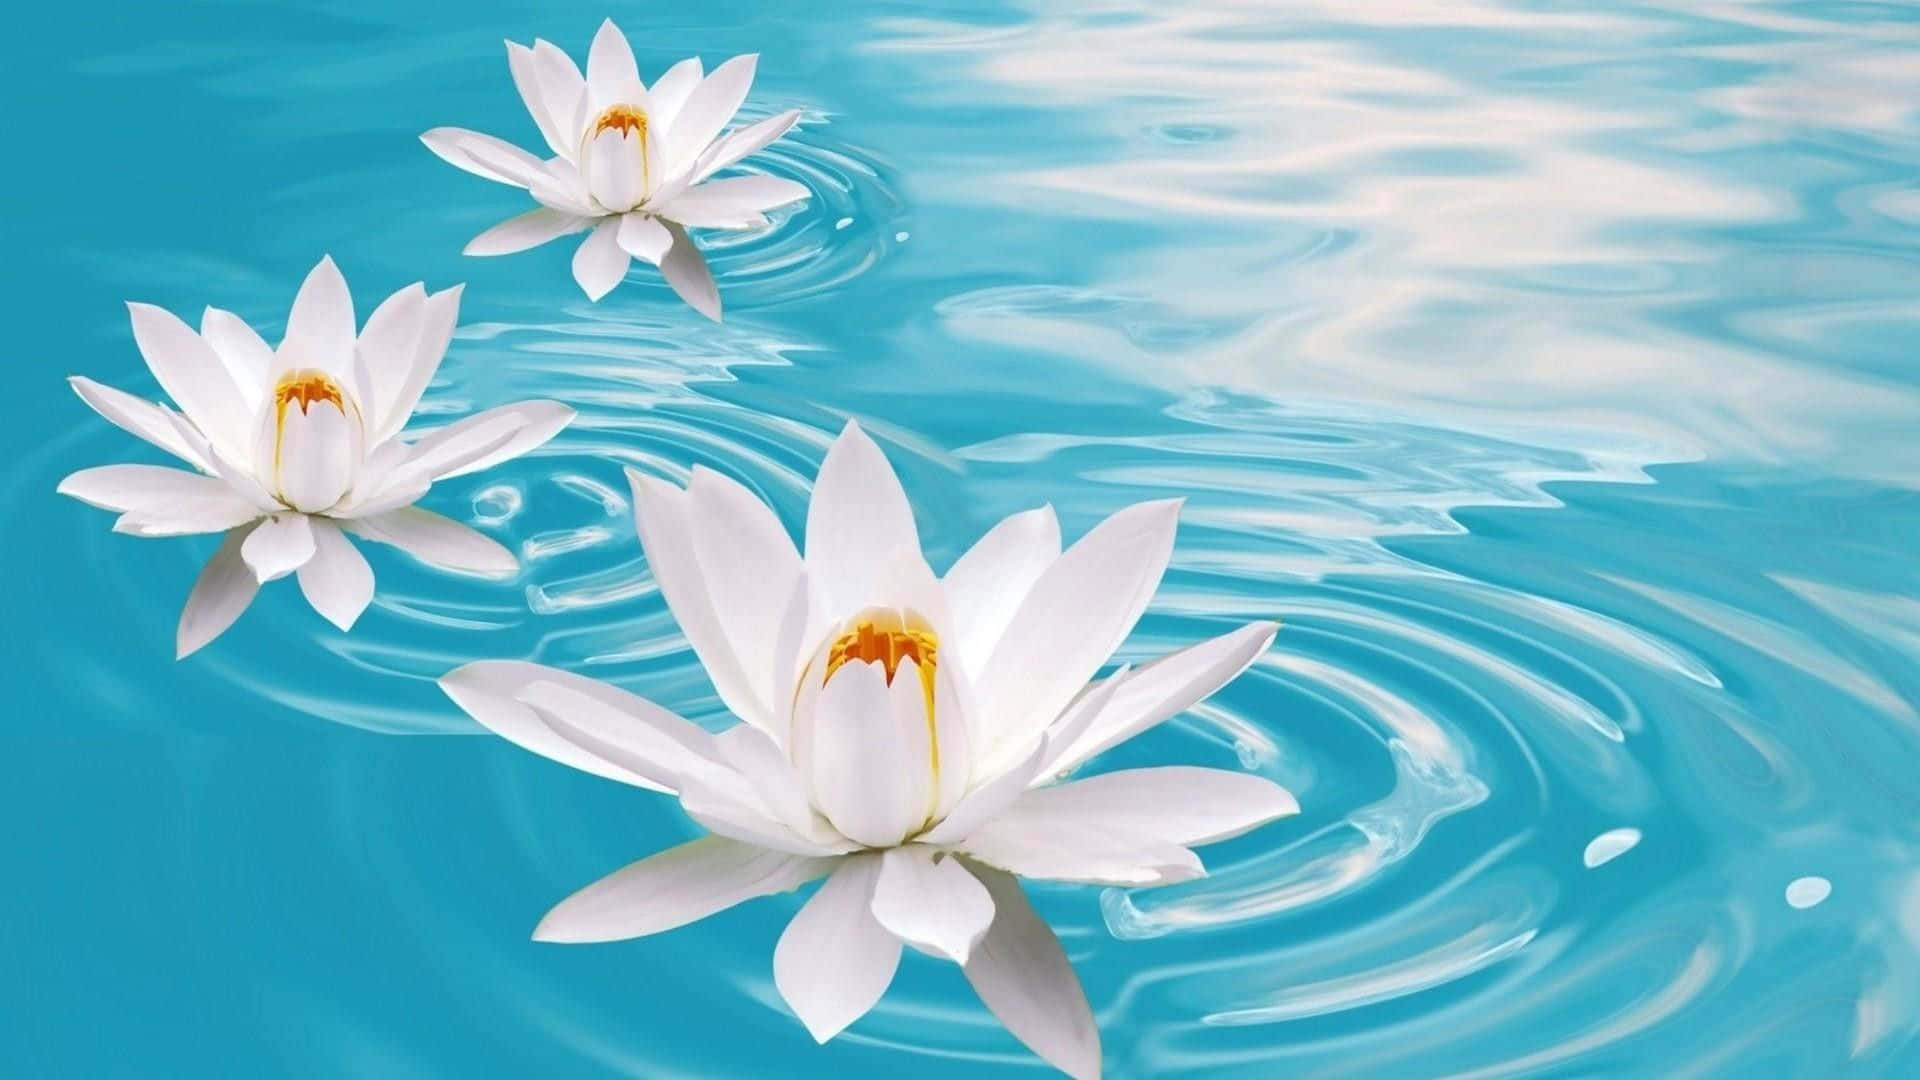 Bring your inner peace to life with the Lotus Flower